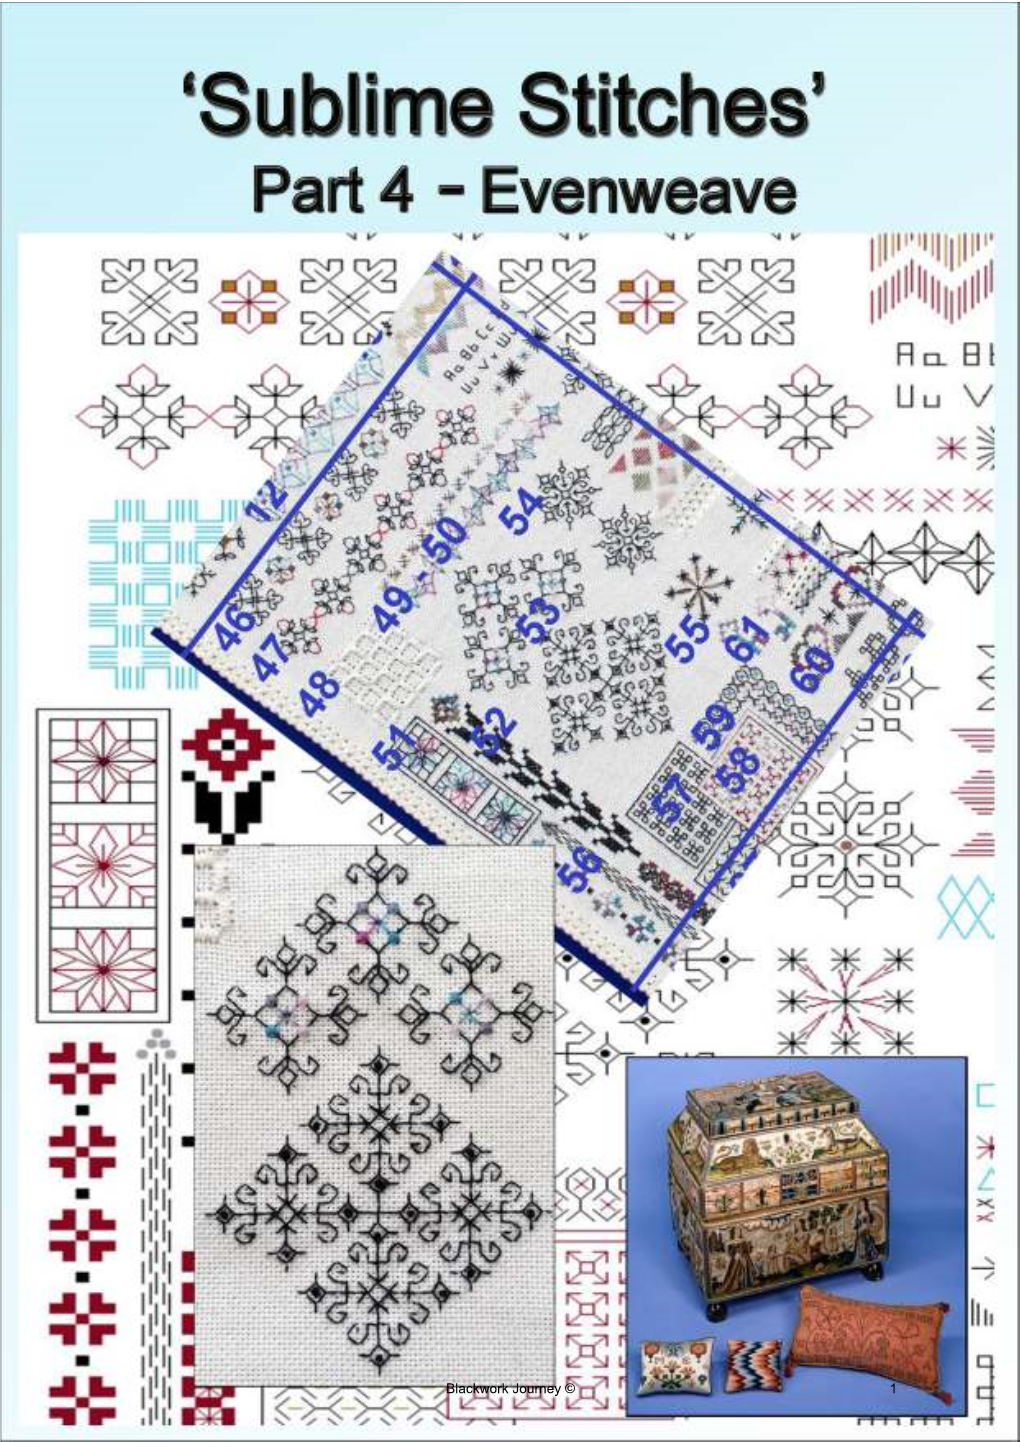 'Sublime Stitches' Evenweave Page 4 Patterns 46